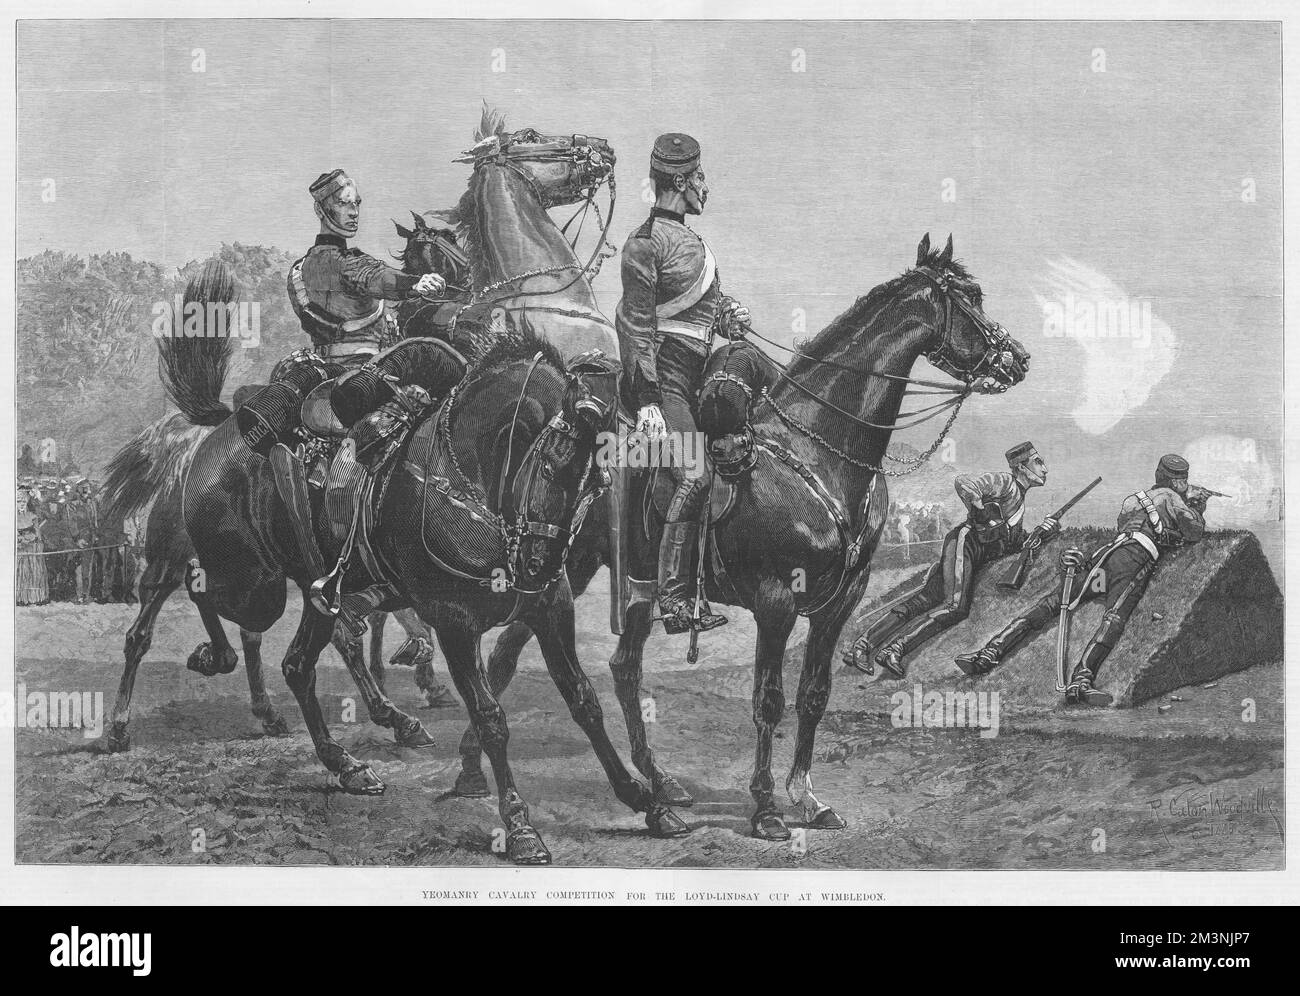 Manoeuvres of the squads of yeomanry cavalry engaged in the competition for the Loyd Lindsay prize at Wimbledon; they have to ride, four together, two of them dismount, and fire while the horses are held by their comrades.     Date: 1886 Stock Photo